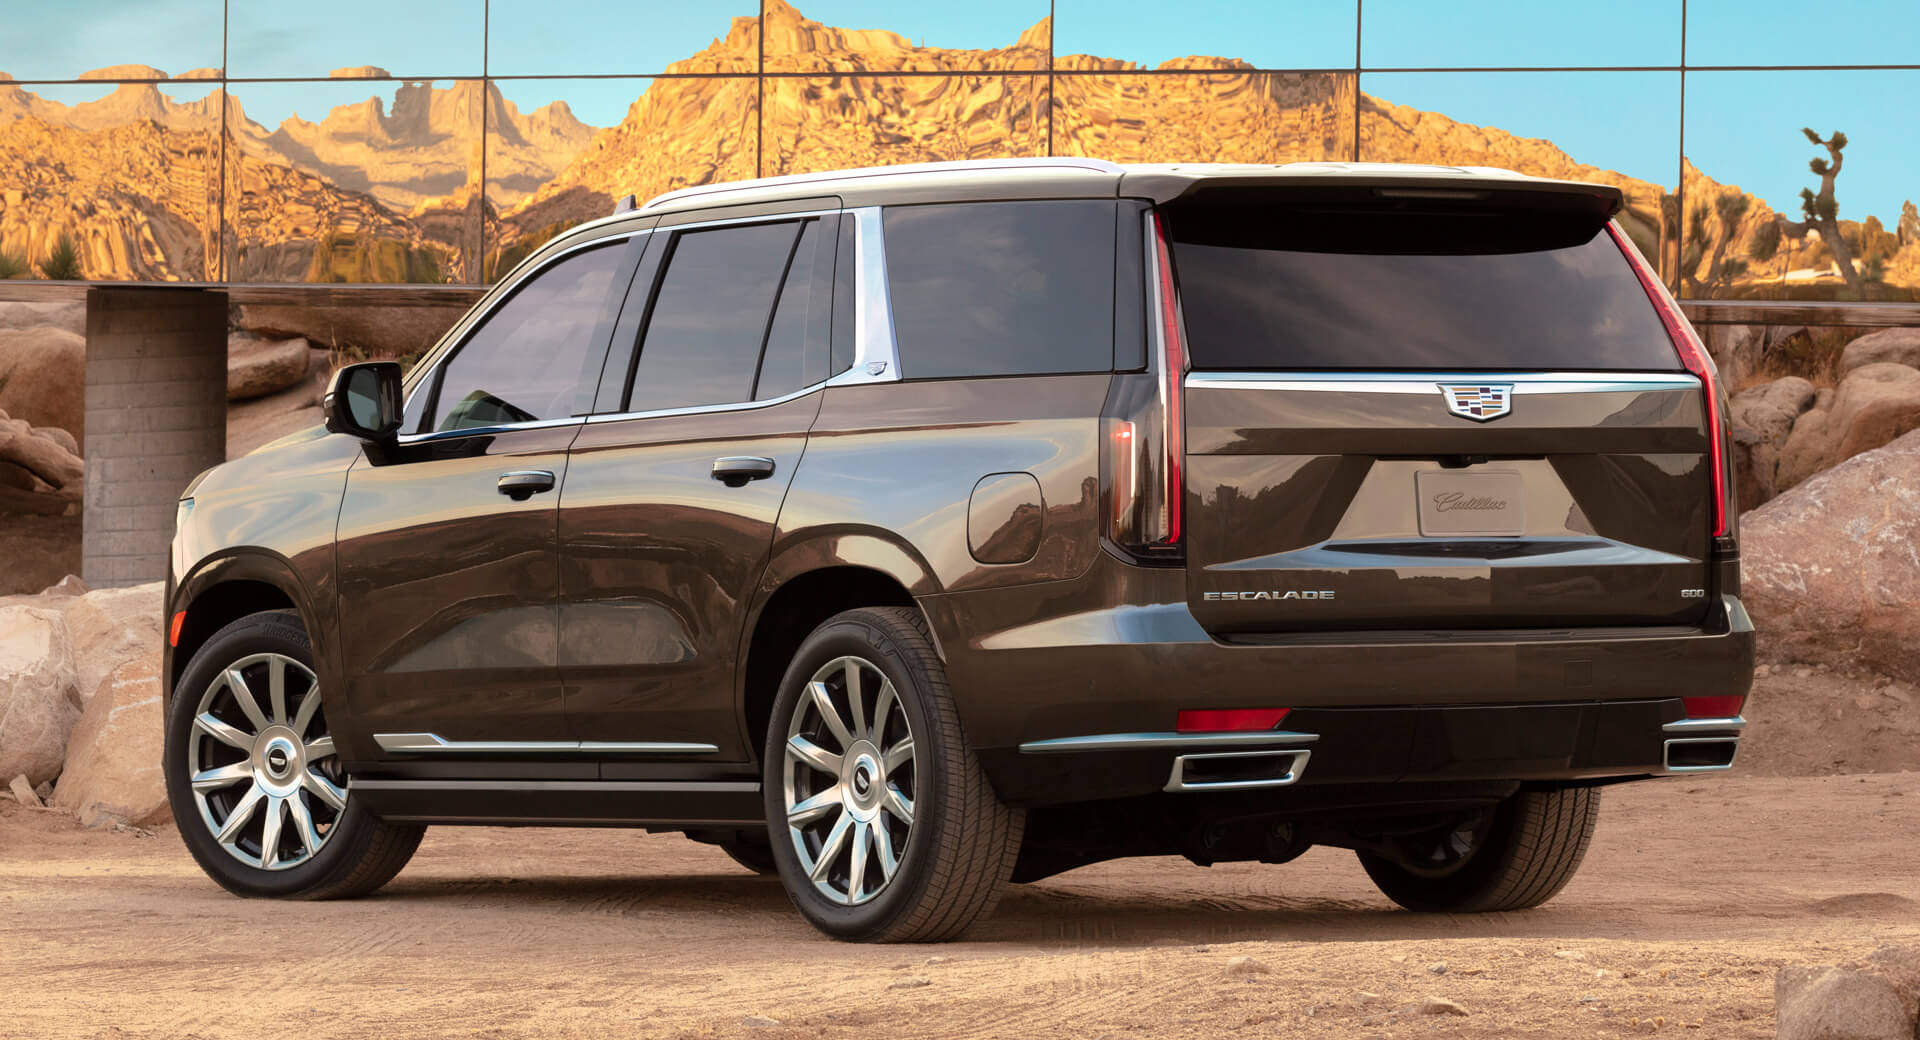 Why The Cadillac Escalade-V Didn't Come To Market Sooner